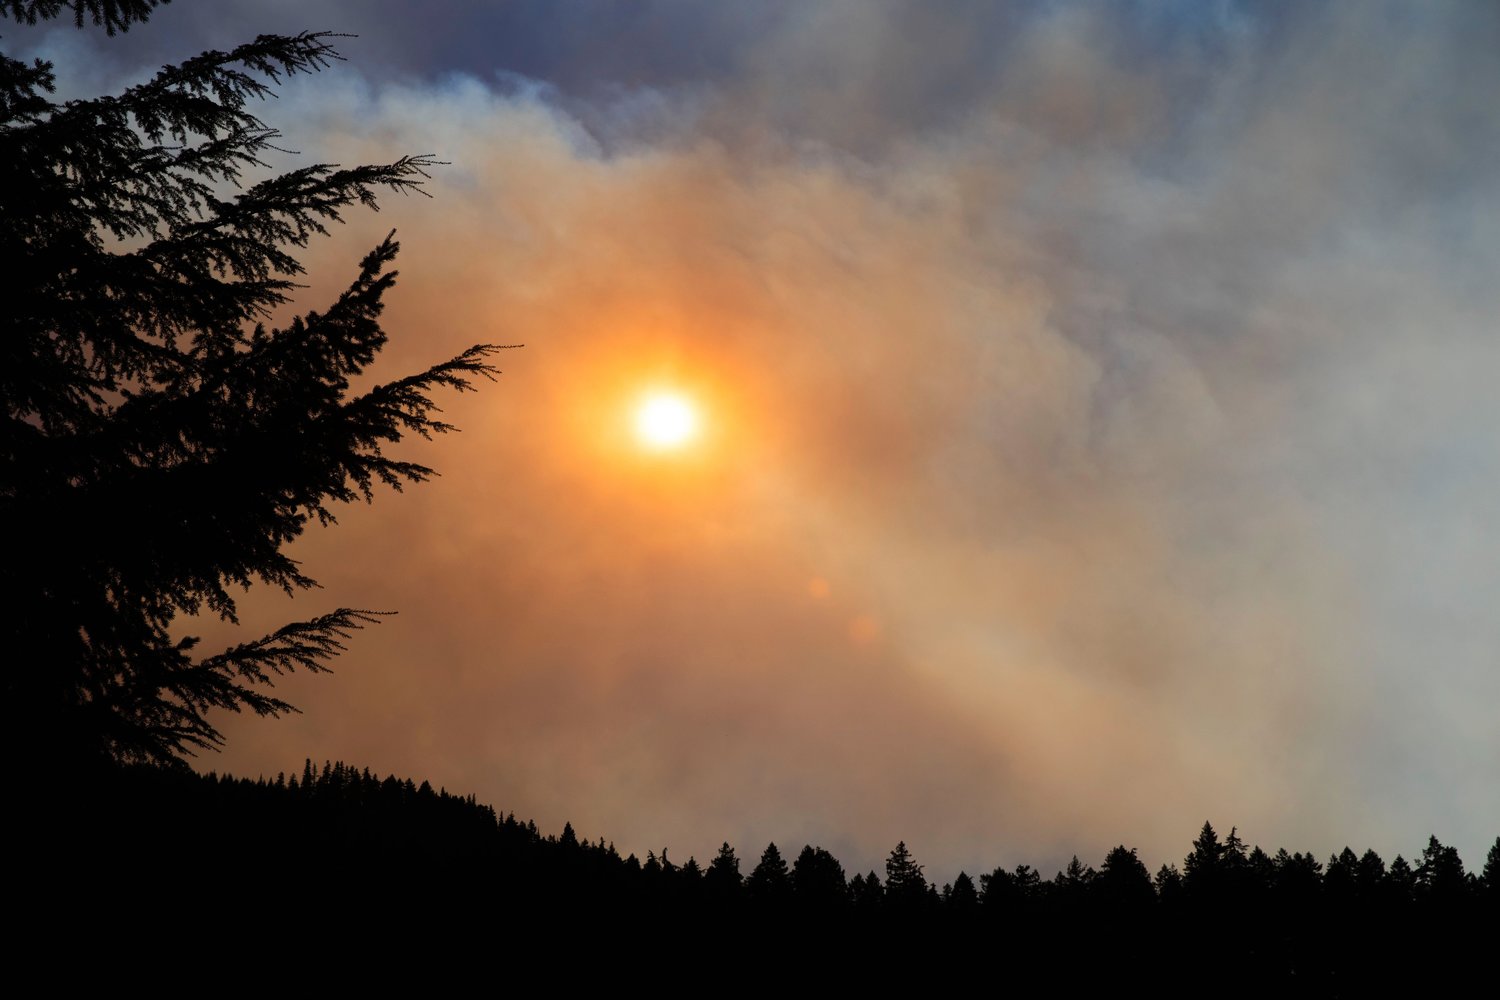 The sun shines through smoke from the Goat Rocks Fire on Sunday as seen from the Palisades Viewpoint off U.S. Highway 12 near Packwood Sunday.